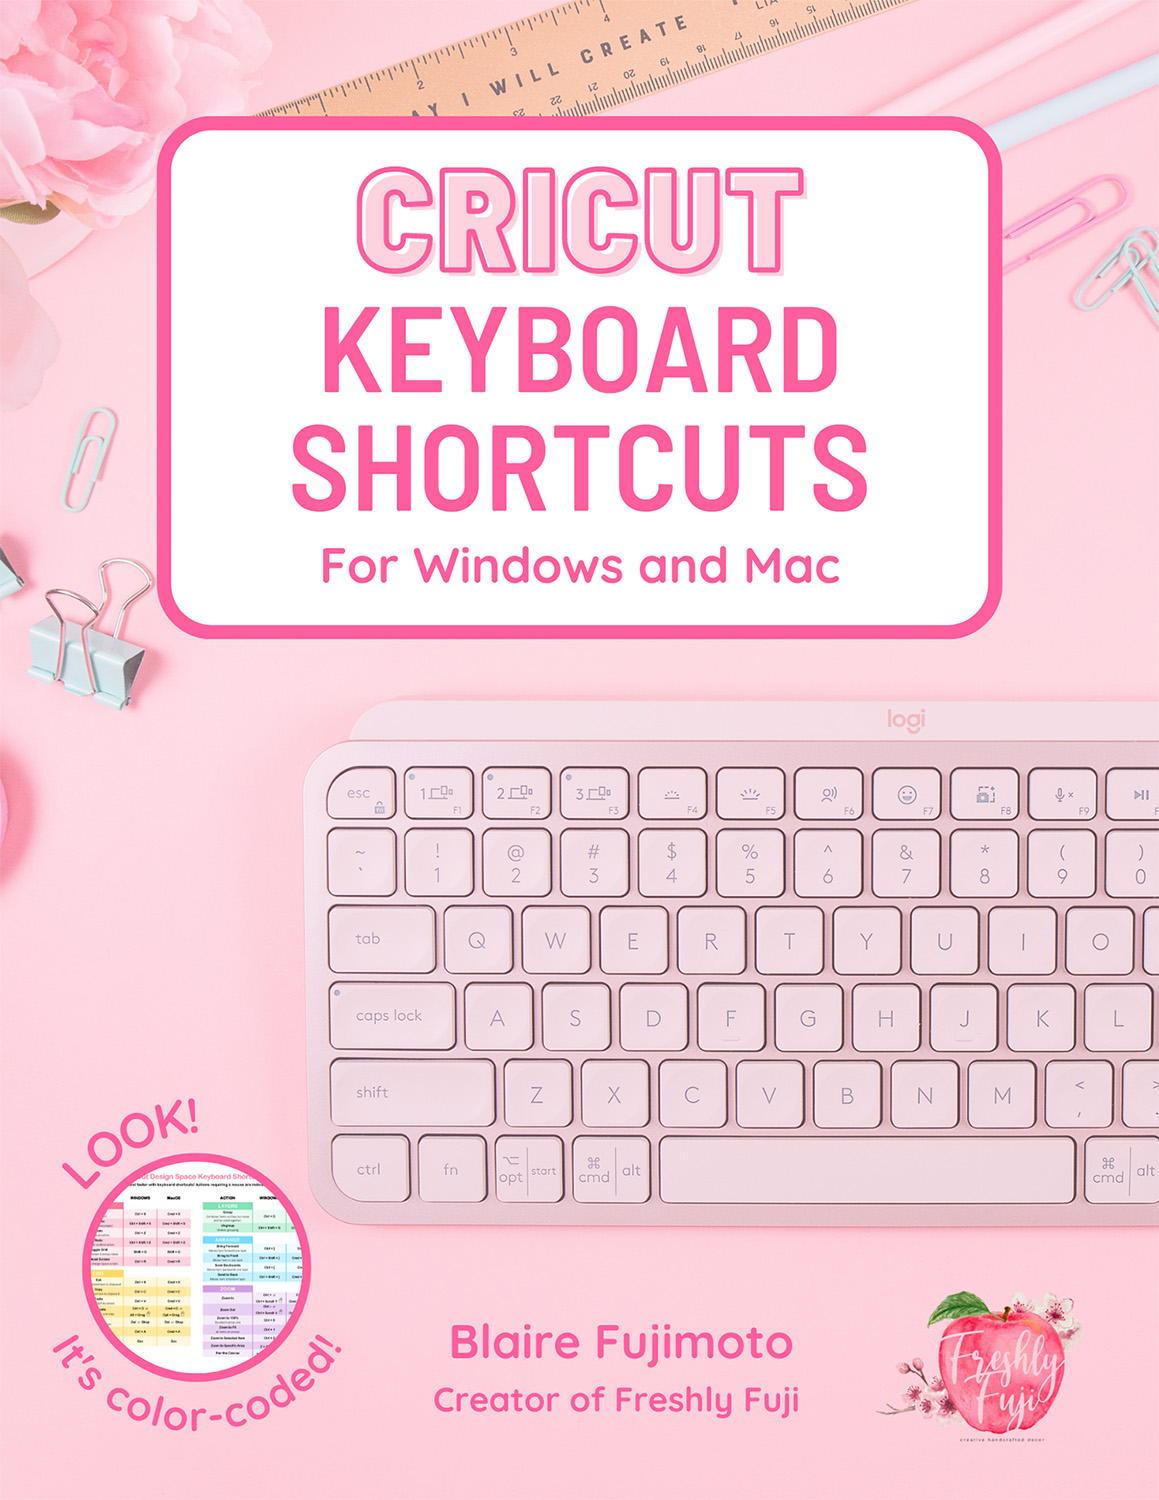 Cricut Keyboard Shortcuts cover page featuring a photo of a pink keyboard.